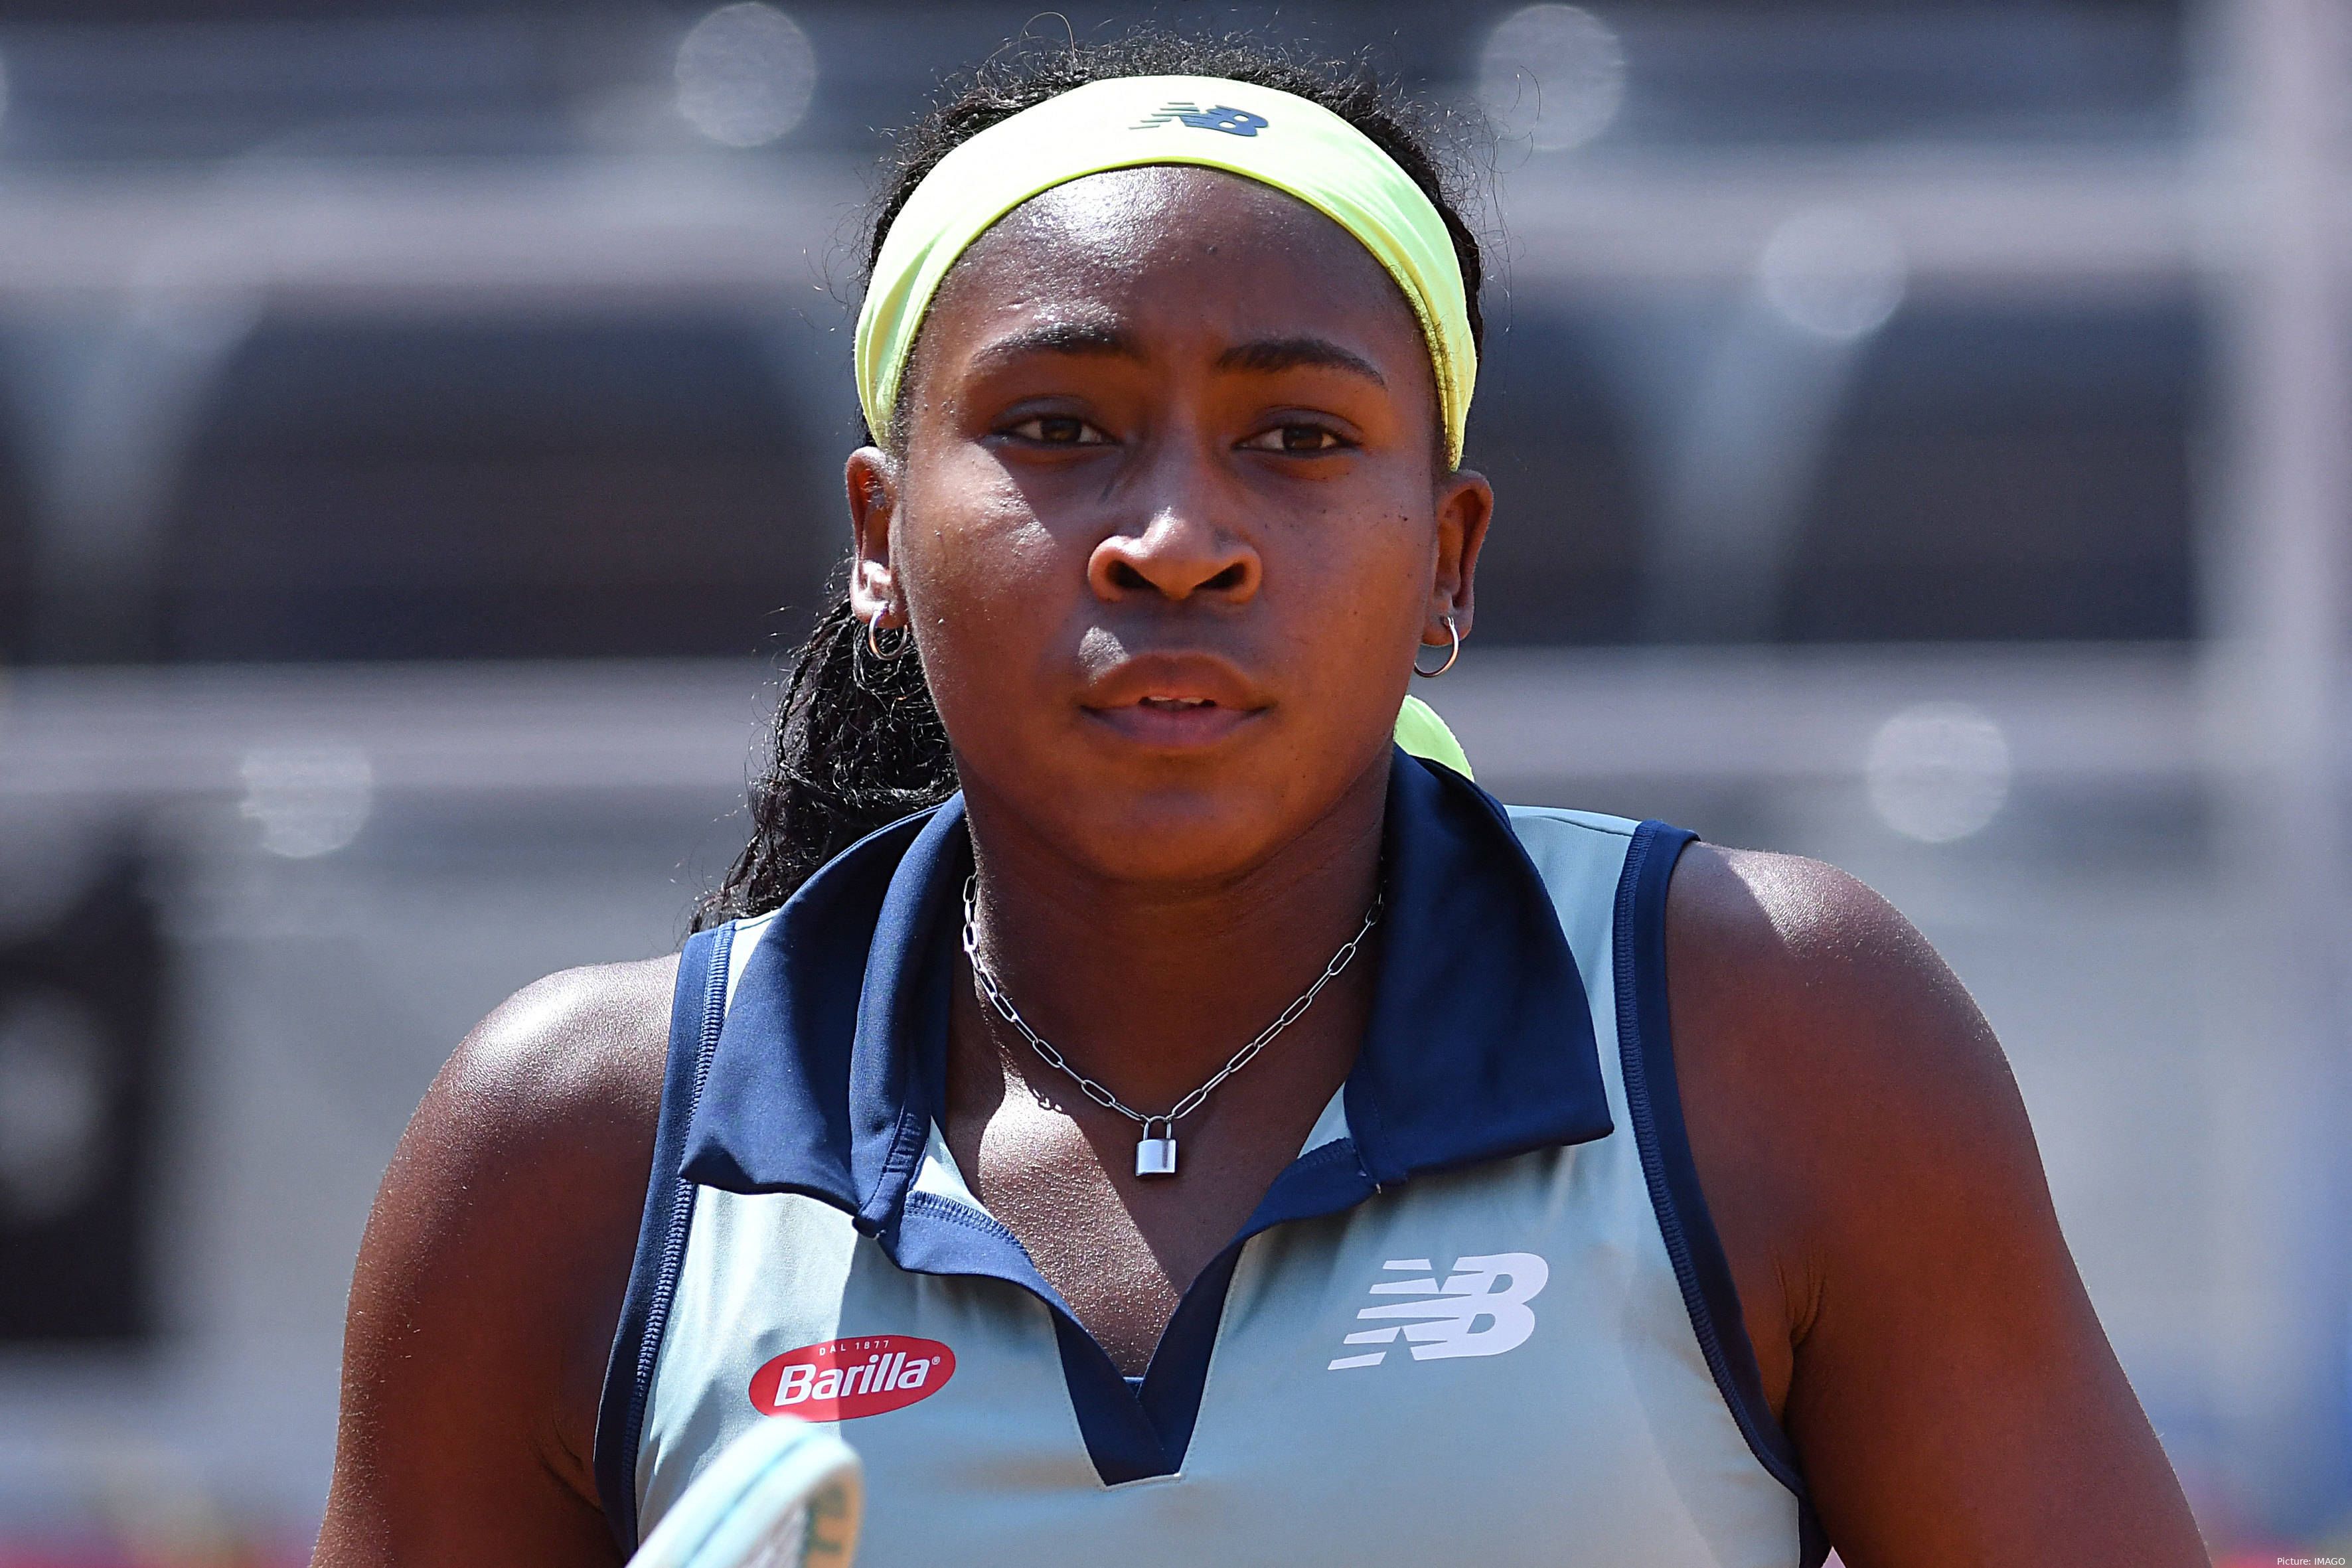 Coco Gauff during this tournament has often been shown outside of makeable hours for Americans.